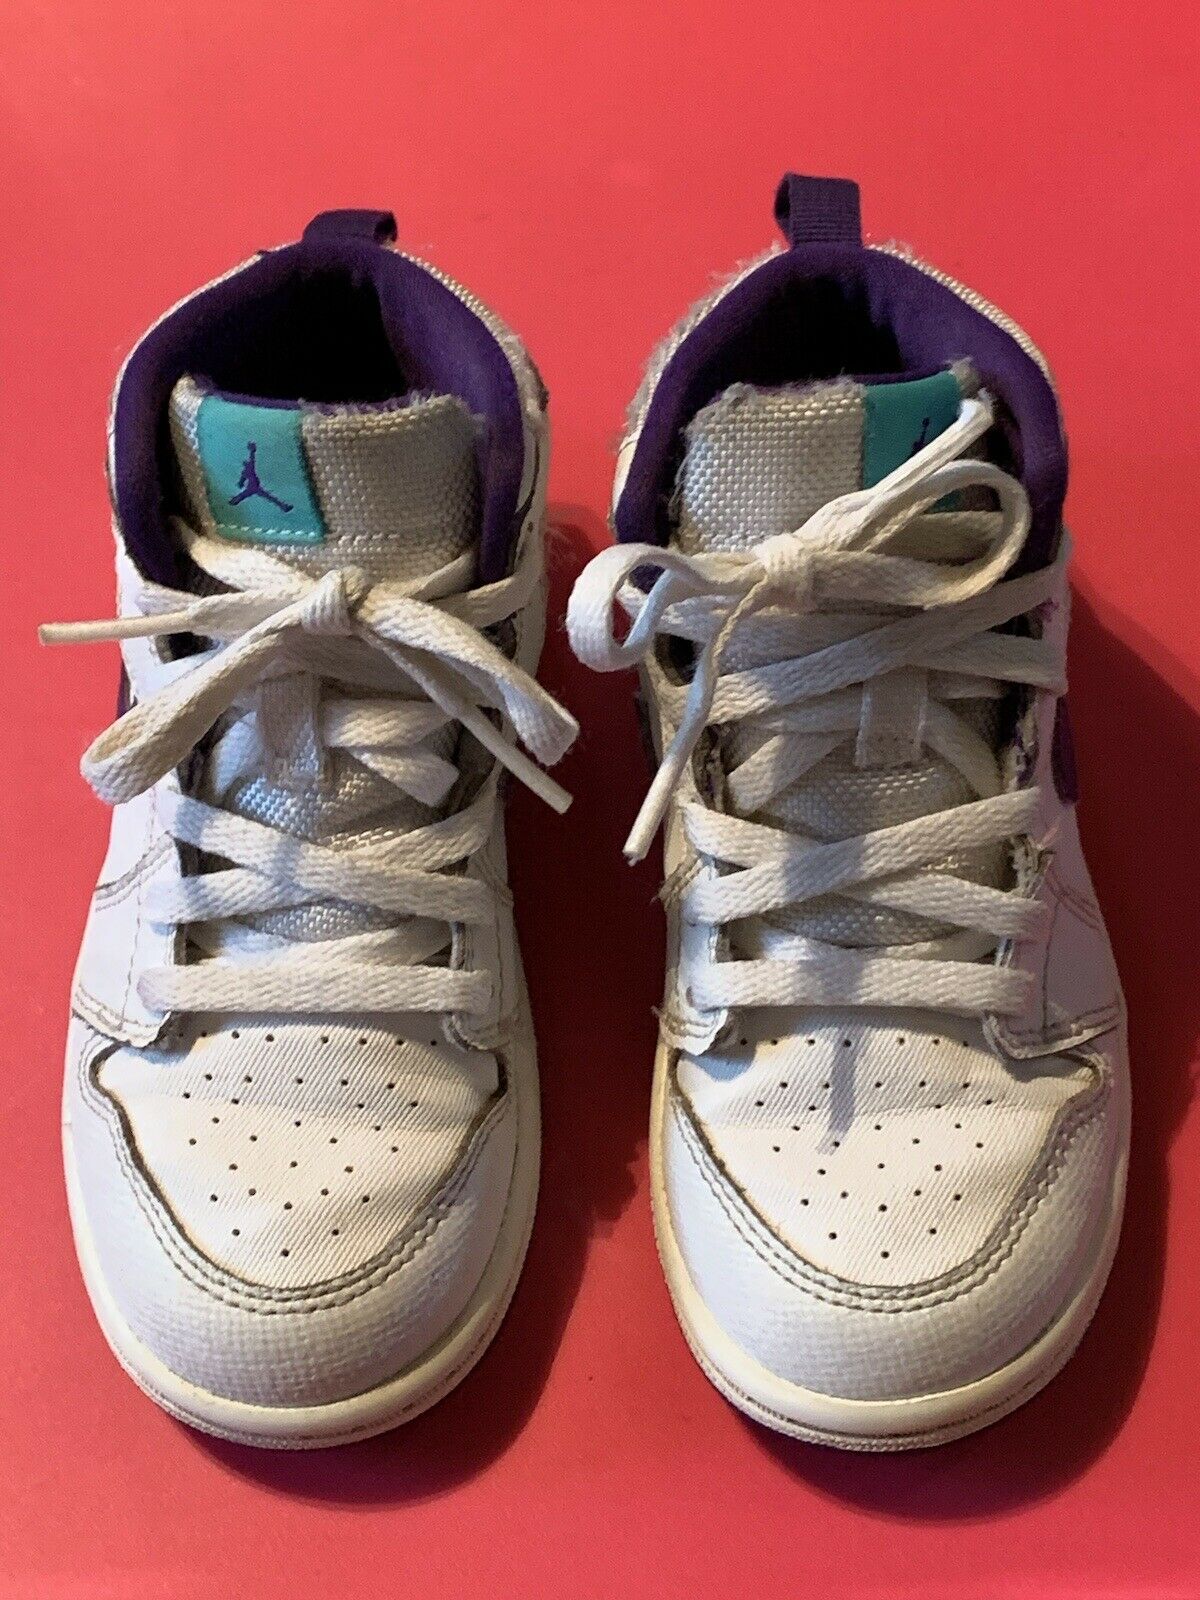 air jordan shoes white with purple nike sign